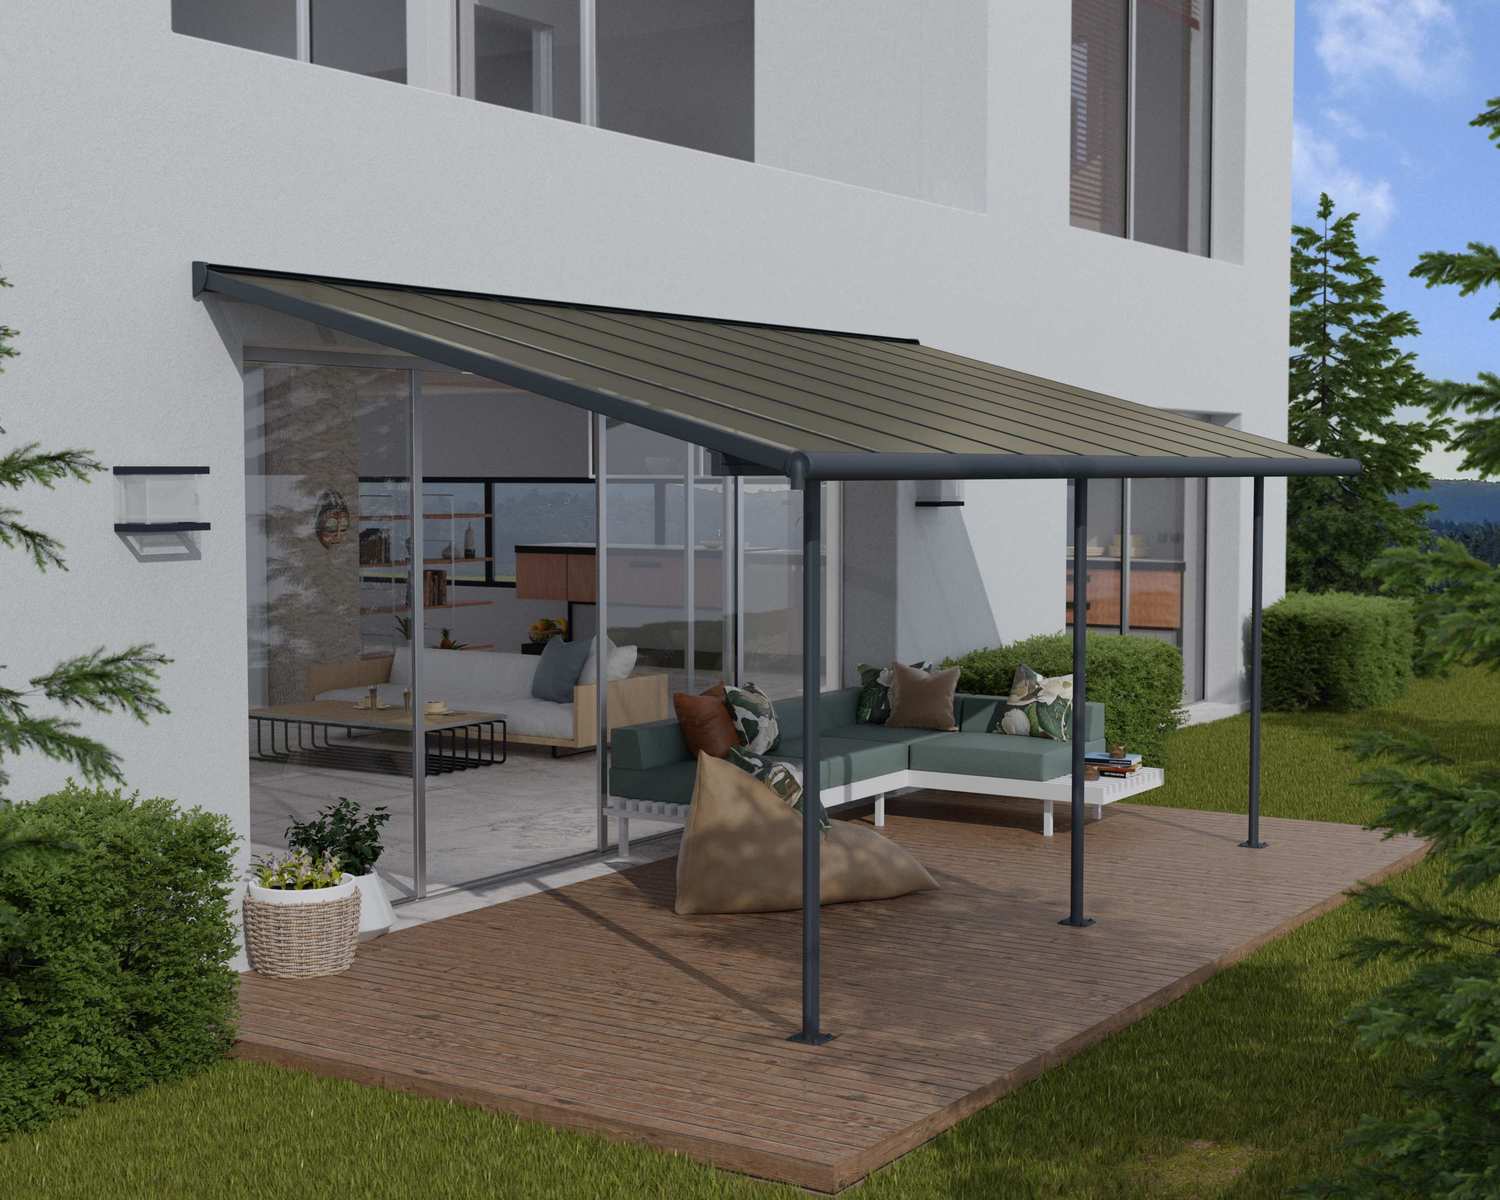 Capri 10 ft. x 20 ft. Grey Aluminium Patio Cover with 3 Posts Attached to House that Covers Patio Outdoor Furniture.